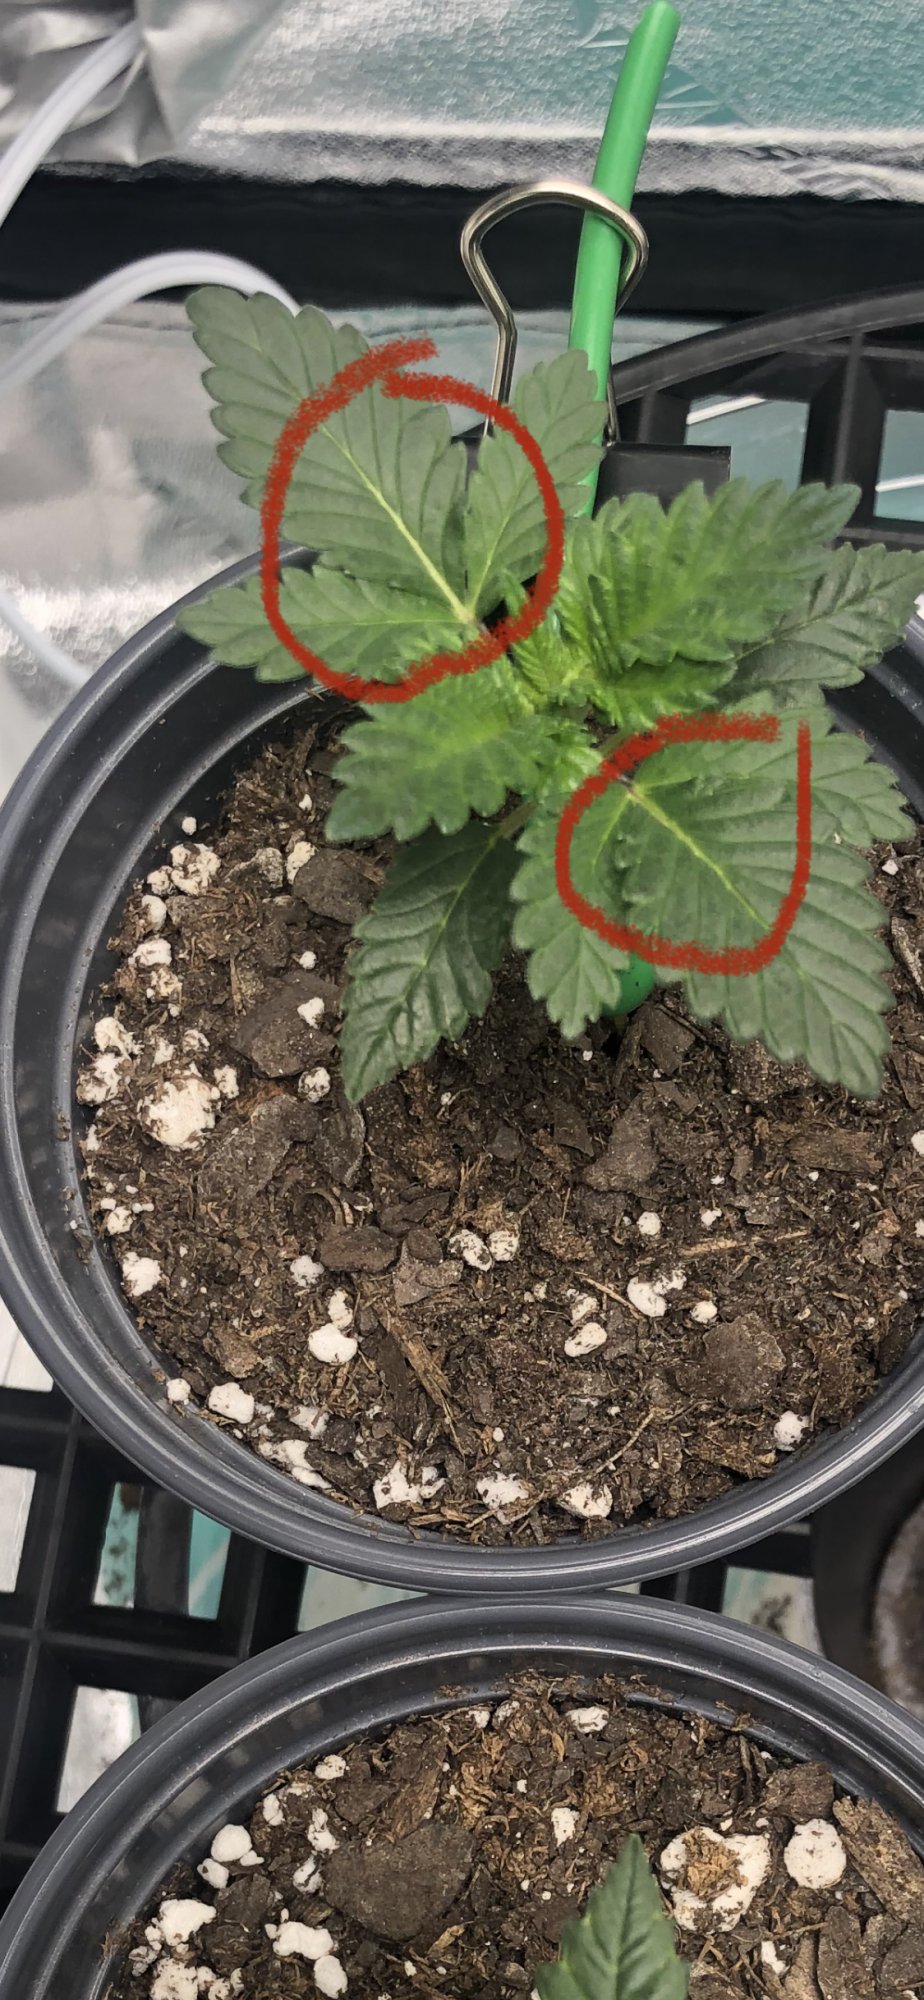 Is this a possible deficiency